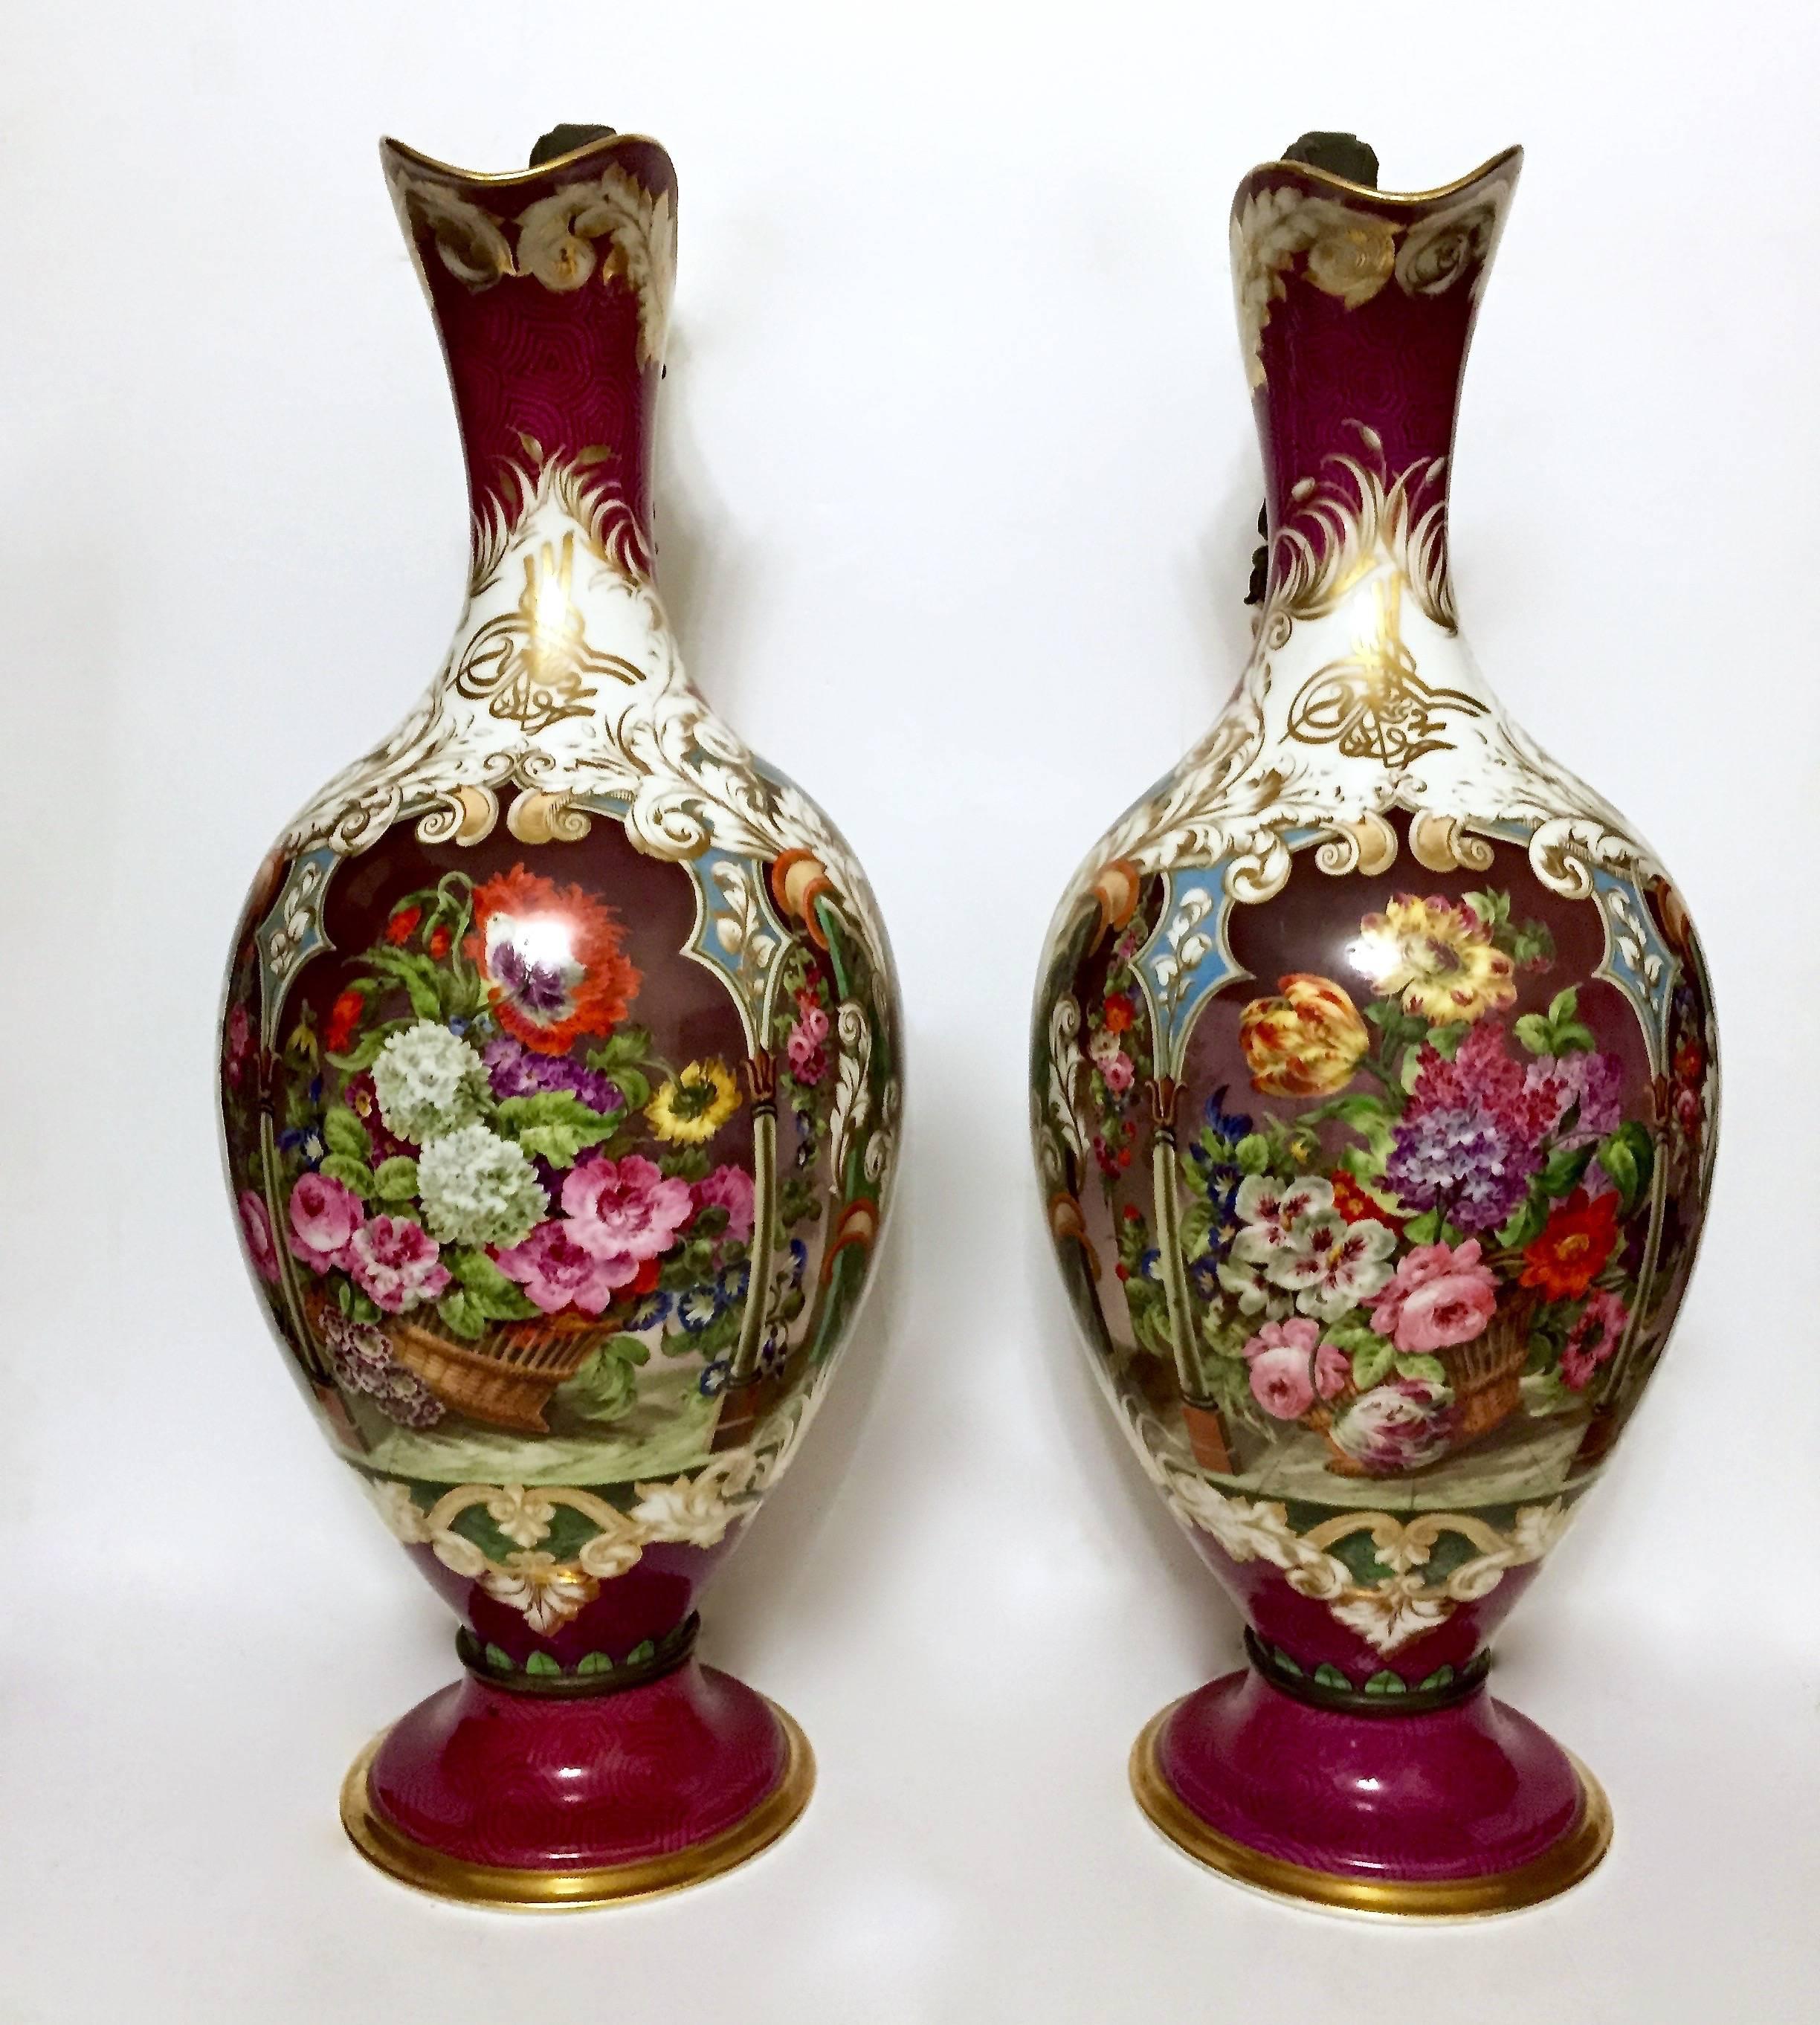 A pair of large 19th century porcelain ewers with tombac handles, featuring the tughra of Sultan Mahmud II. Each of a baluster form, with gilt tombac handles. The front of the neck features the tughra (a type of monogram/signature/seal) for the